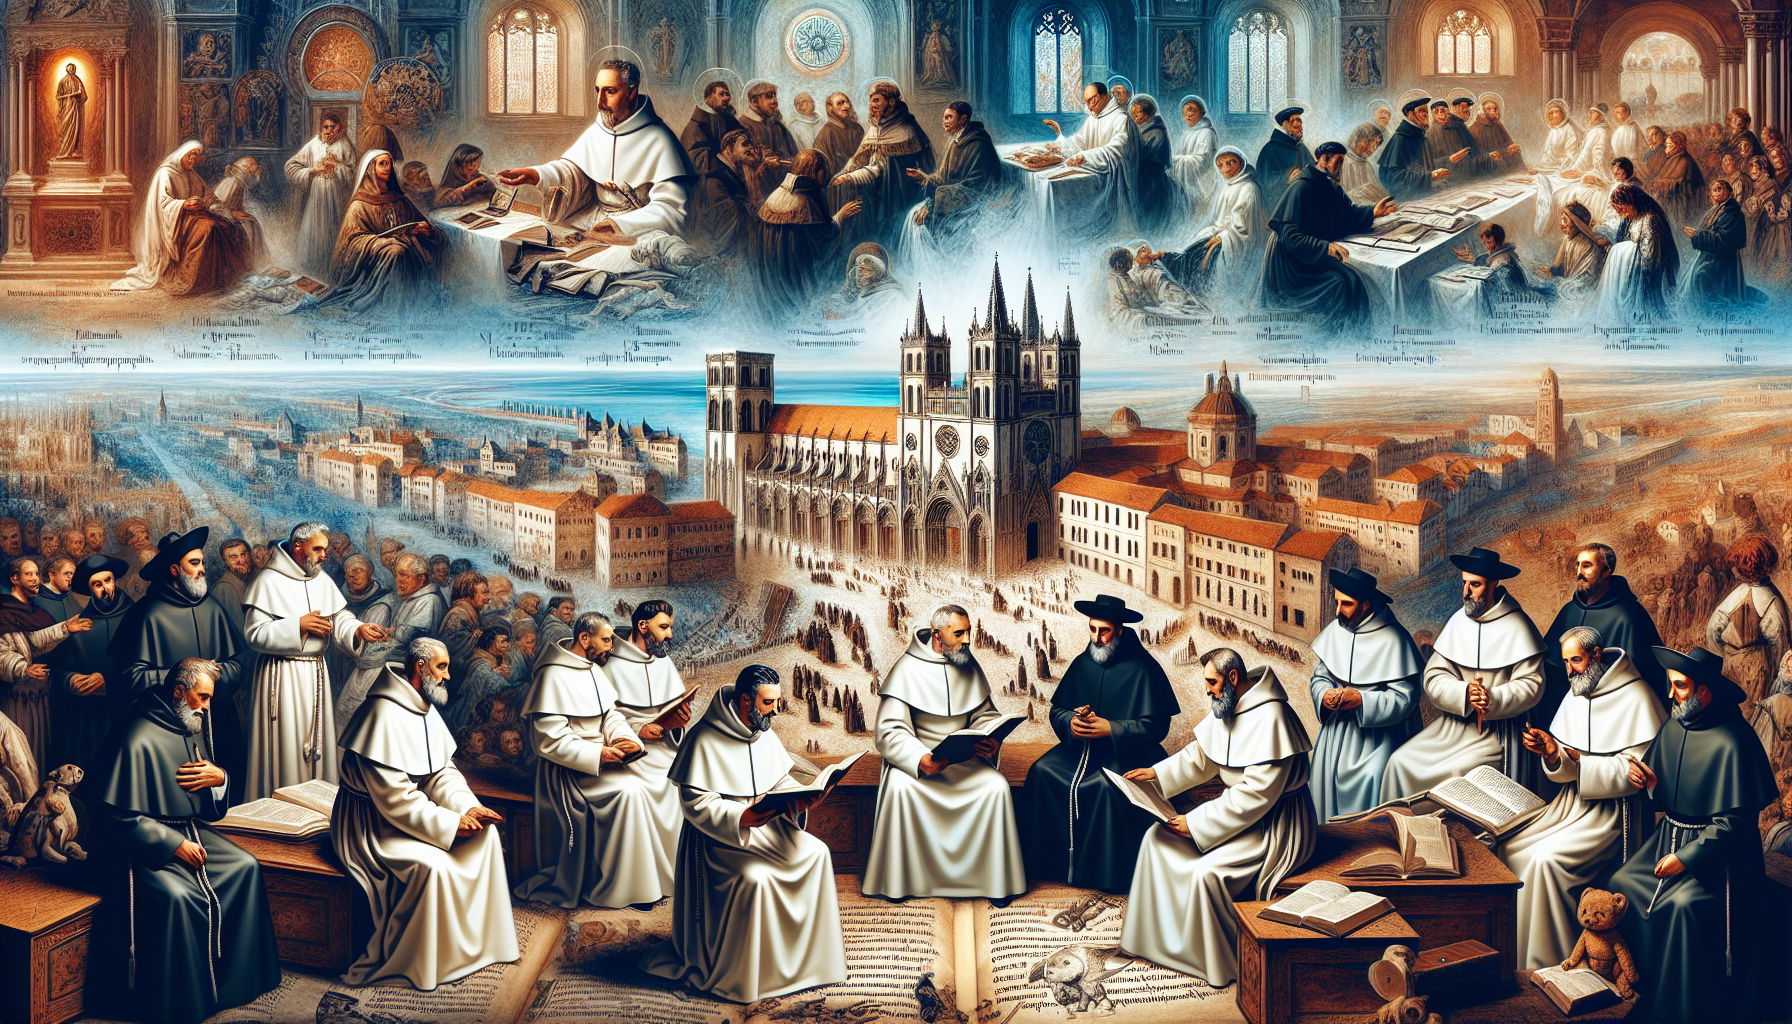 Create an illustration capturing the rich history of the Dominicans (Dominicos). Depict a timeline with key moments: the founding of the Dominican Order by St. Dominic in the early 13th century, Domin